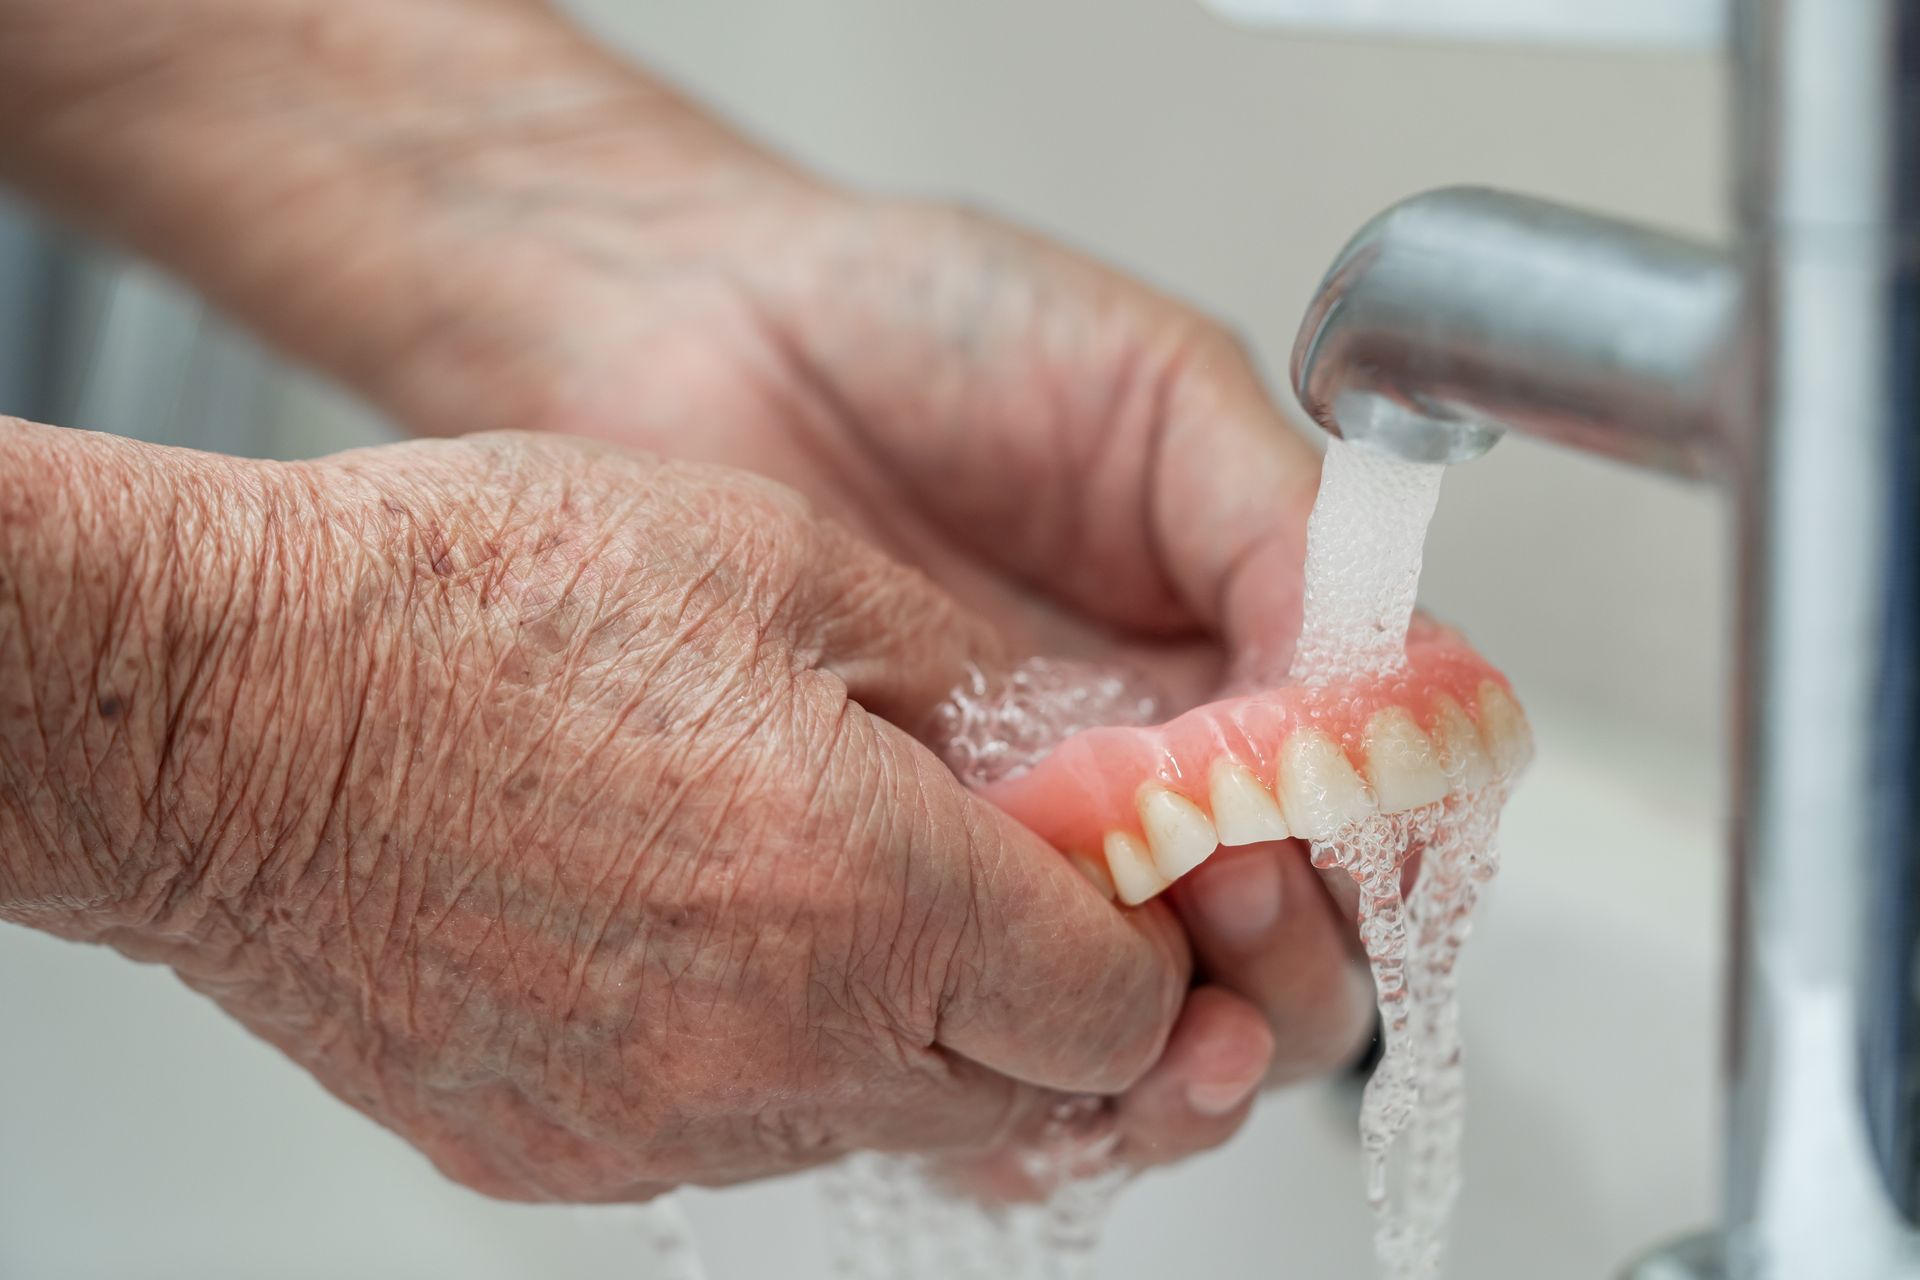 cleaning a denture